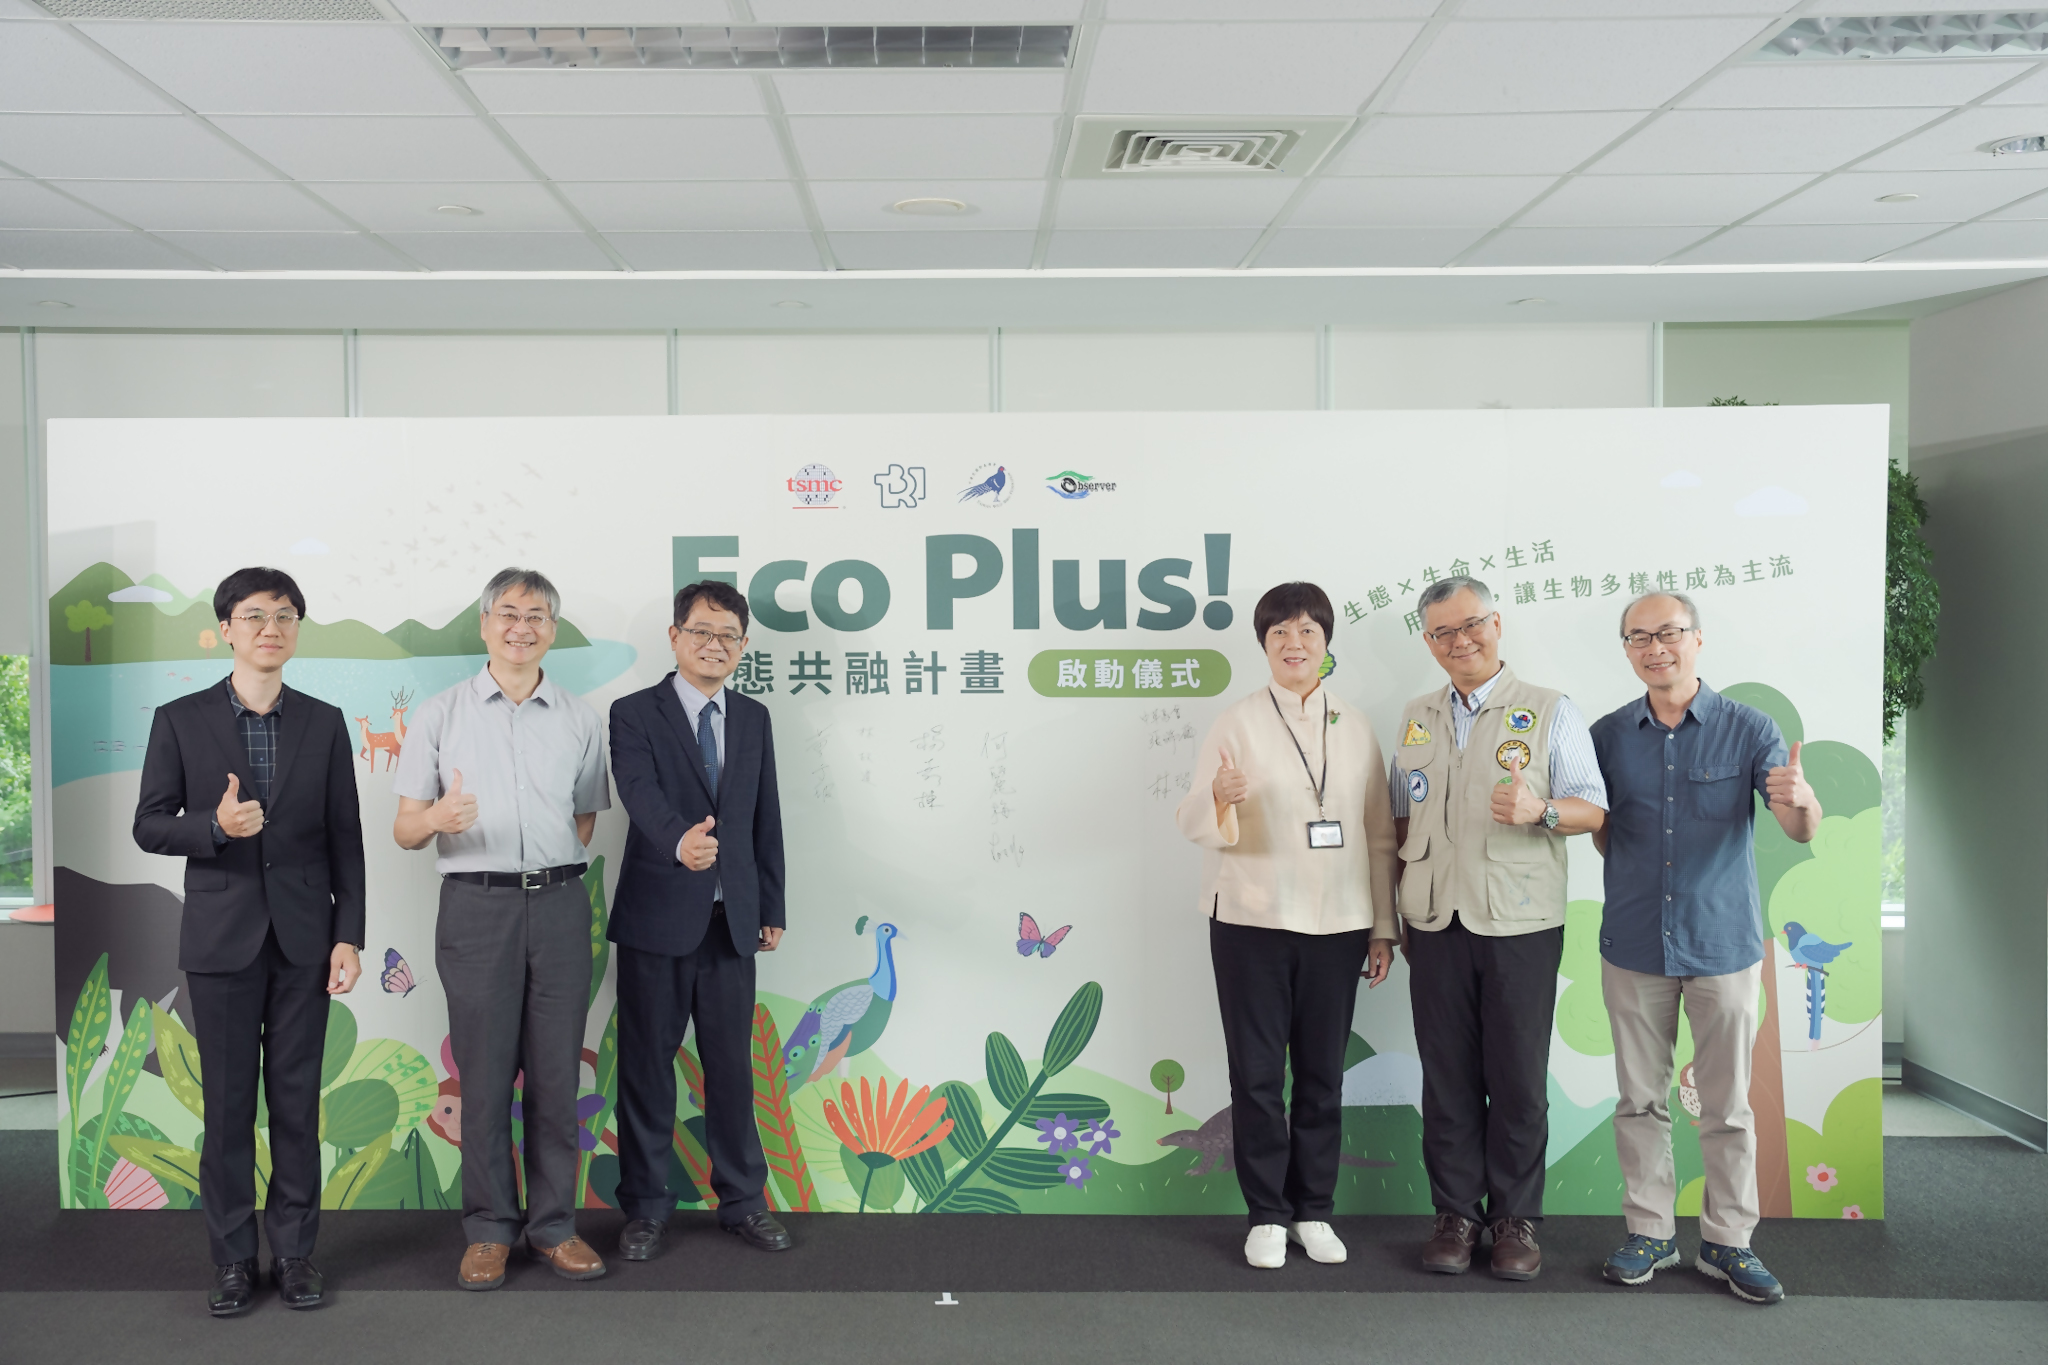 1_Eco Plus!－The Ecological Co-Prosperity Project is launched! Looking to the future, we aim to fully realize the vision of technology and ecological co-prosperity..jpg